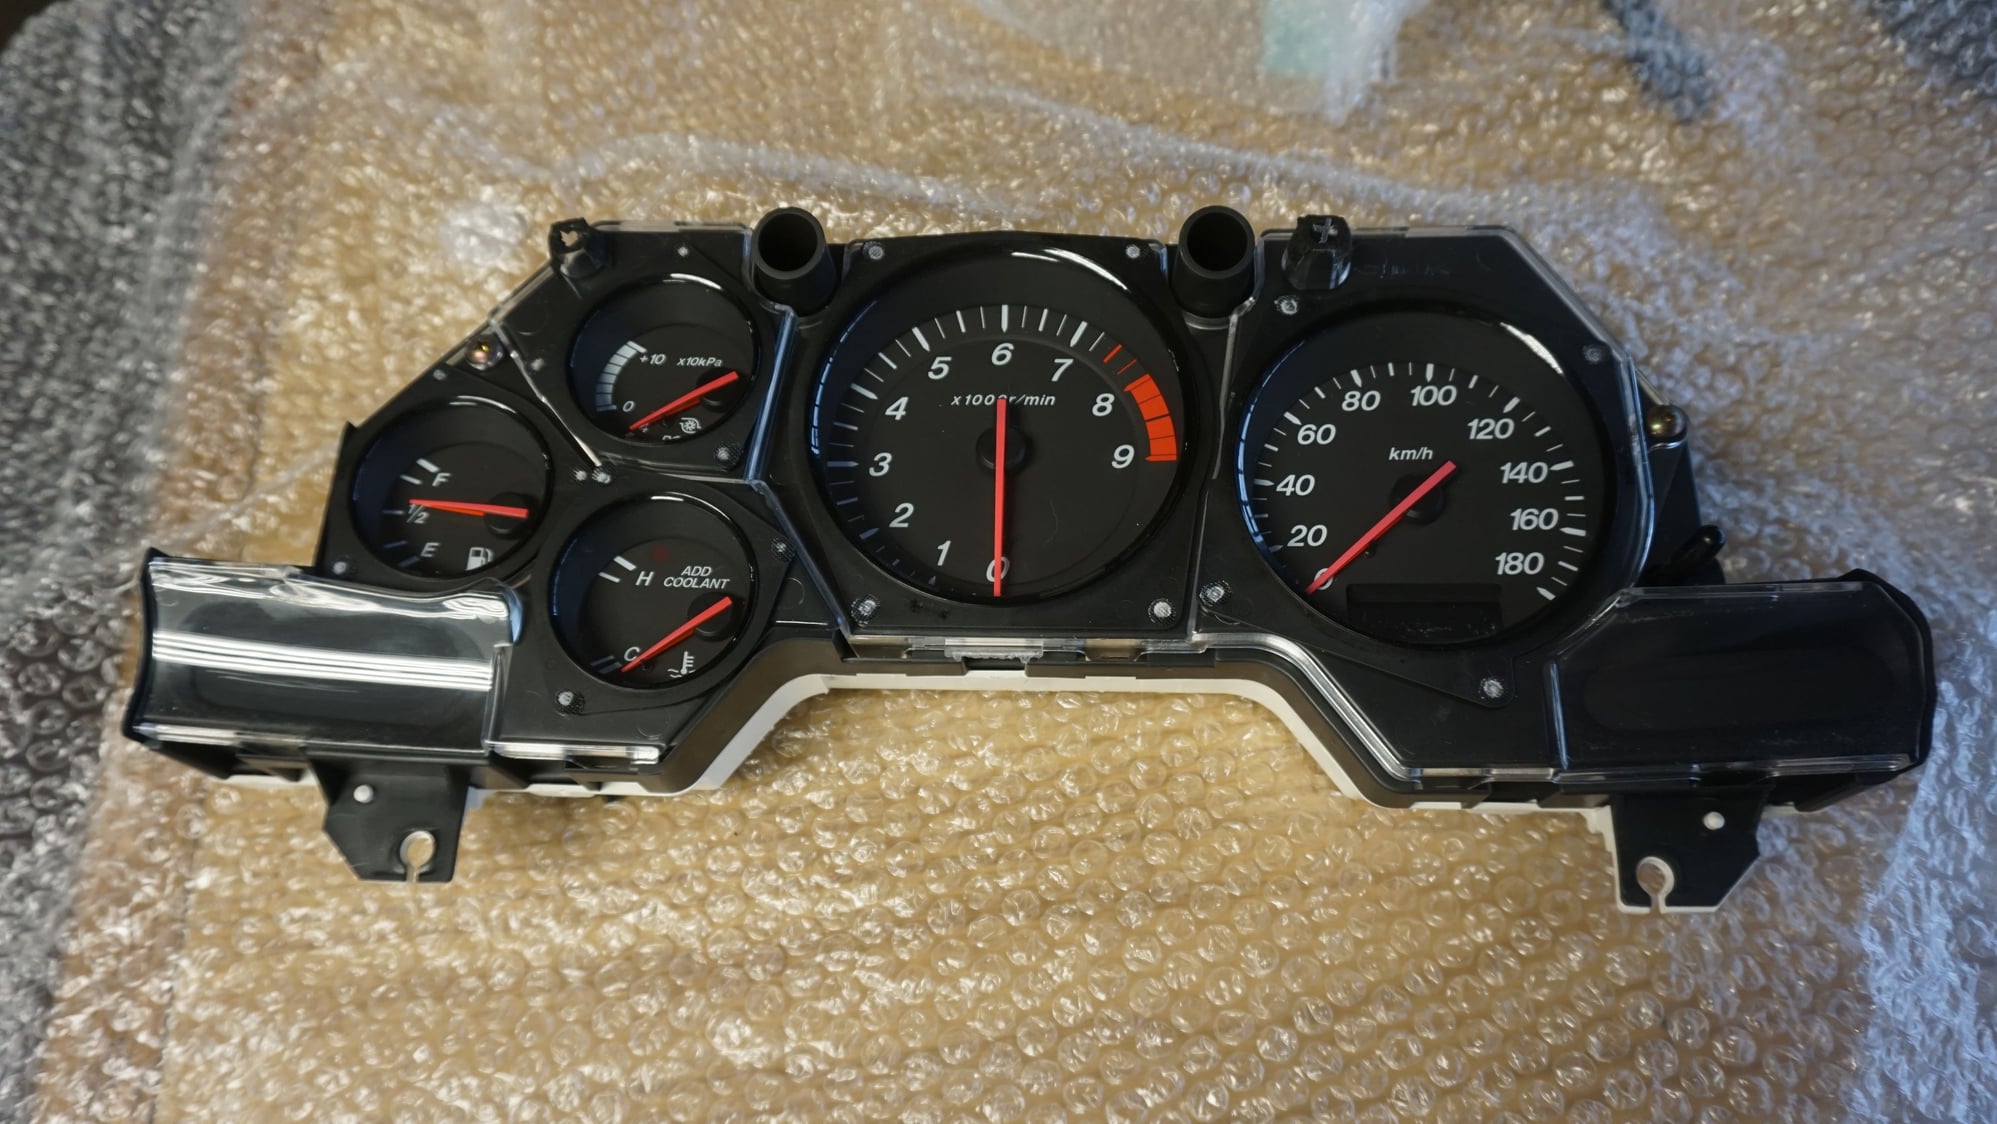 Accessories - 99 Cluster - Used - 1993 to 2002 Mazda RX-7 - Tampa, FL 33634, United States